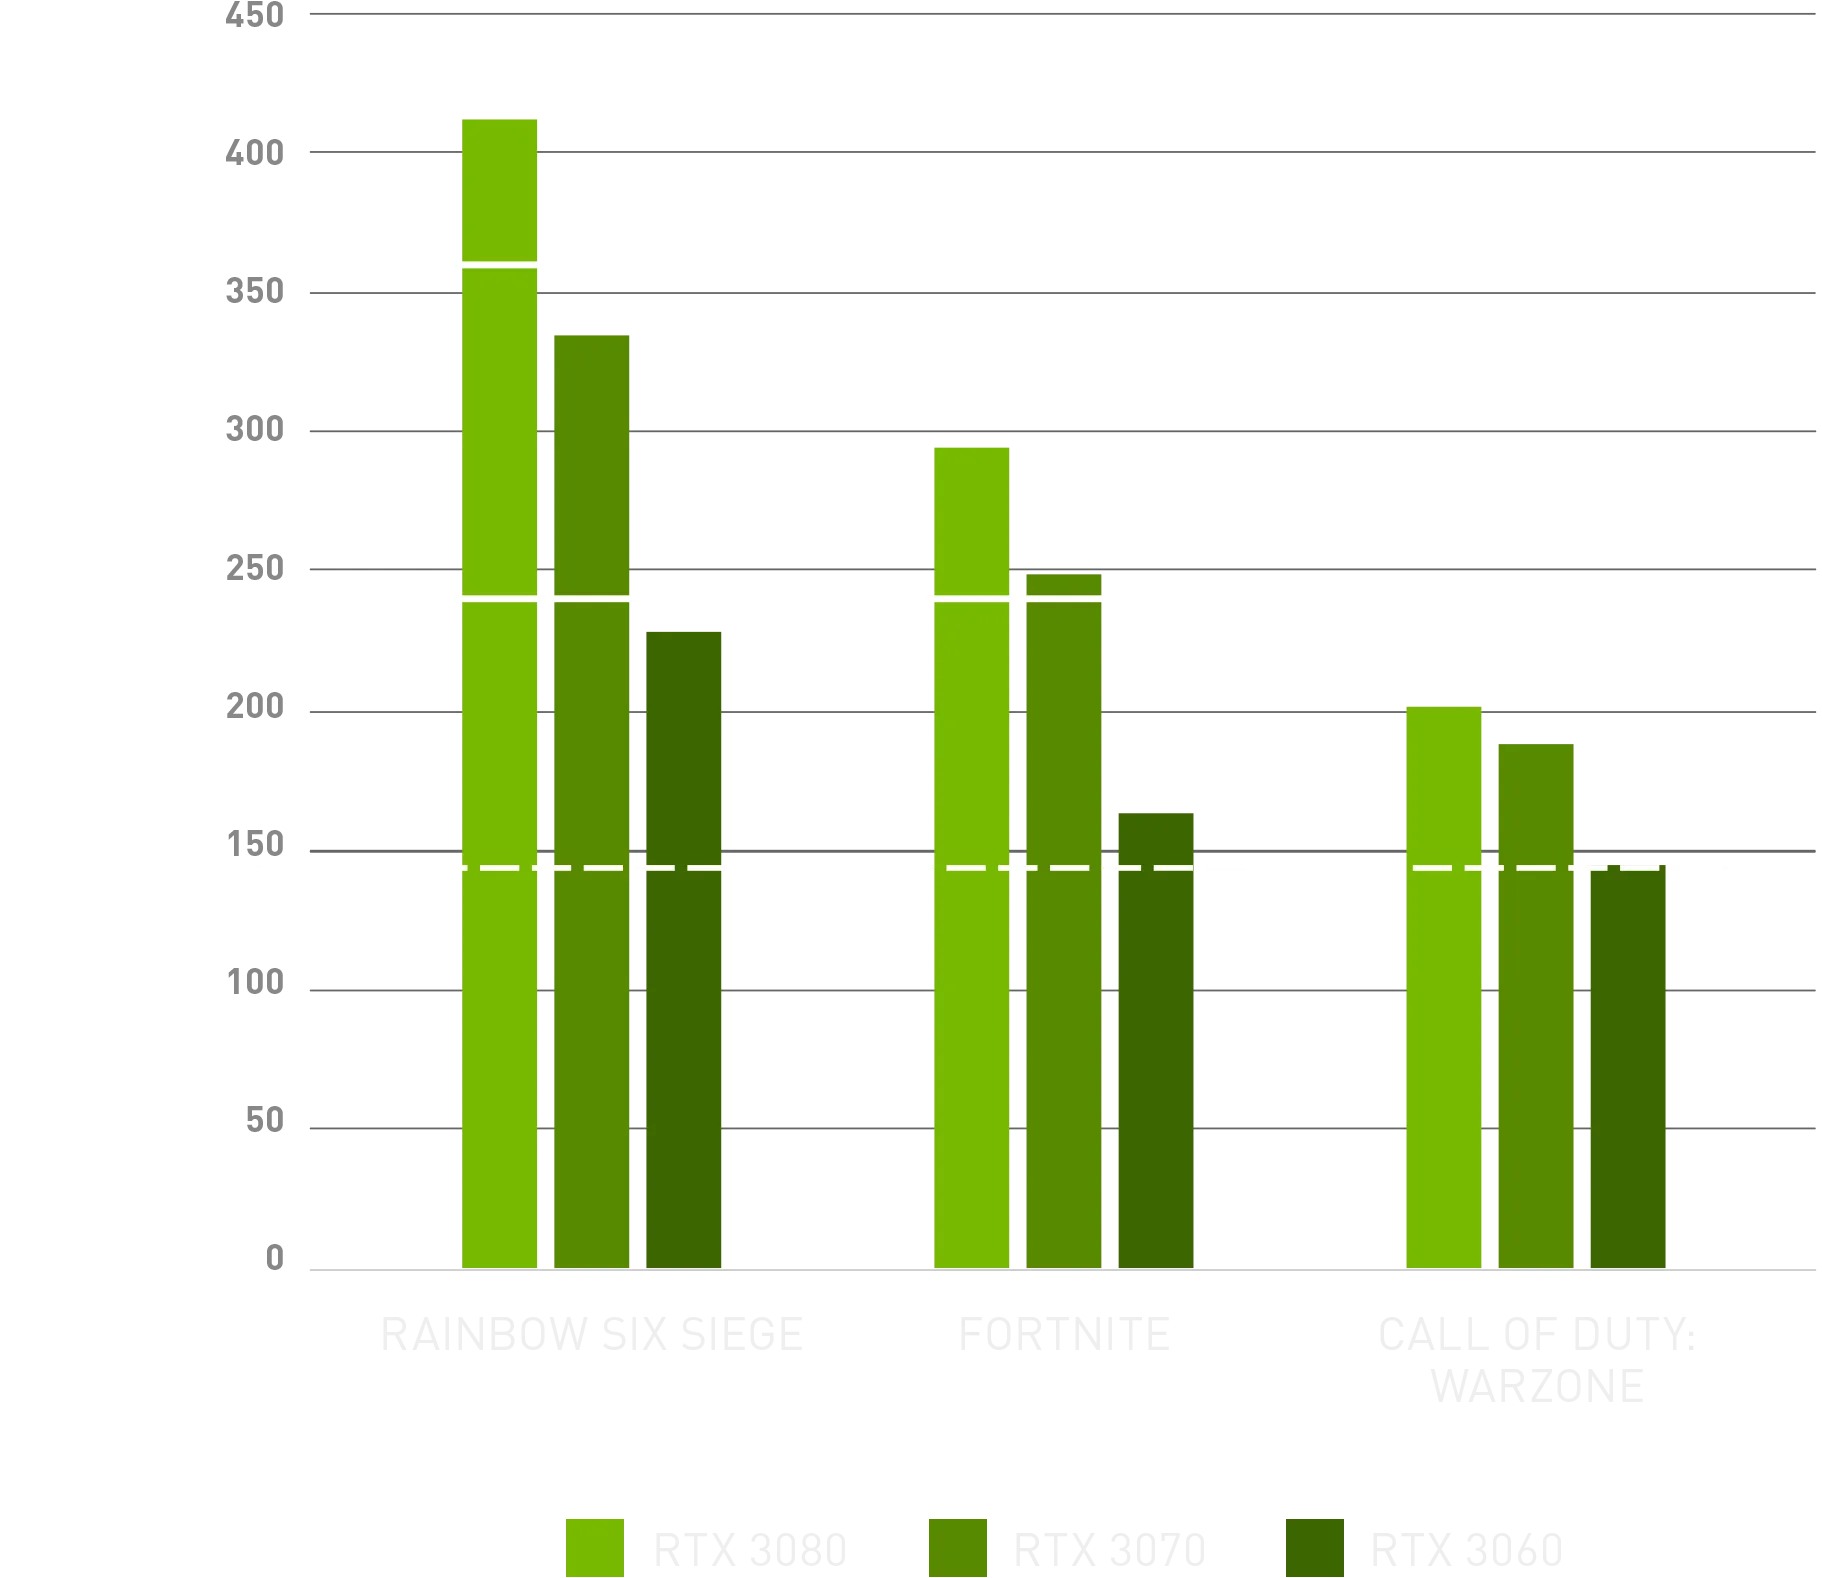 Gaming Frames Per Second Chart